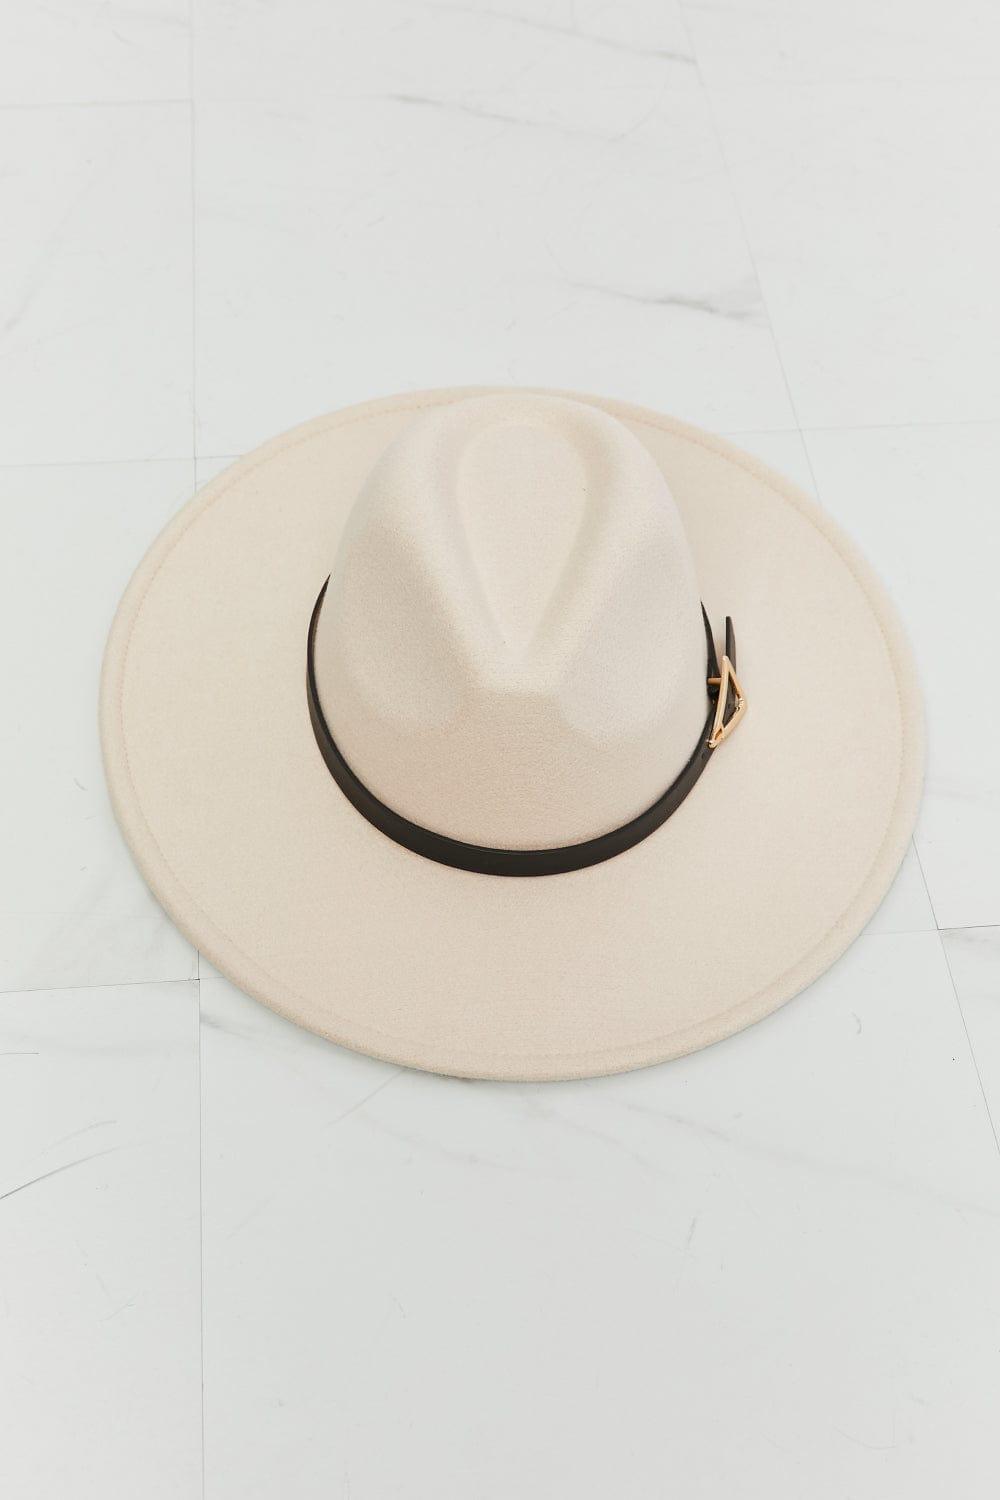 Fame ACCESSORIES Beige / One Size Fame Ride Along Fedora Hat